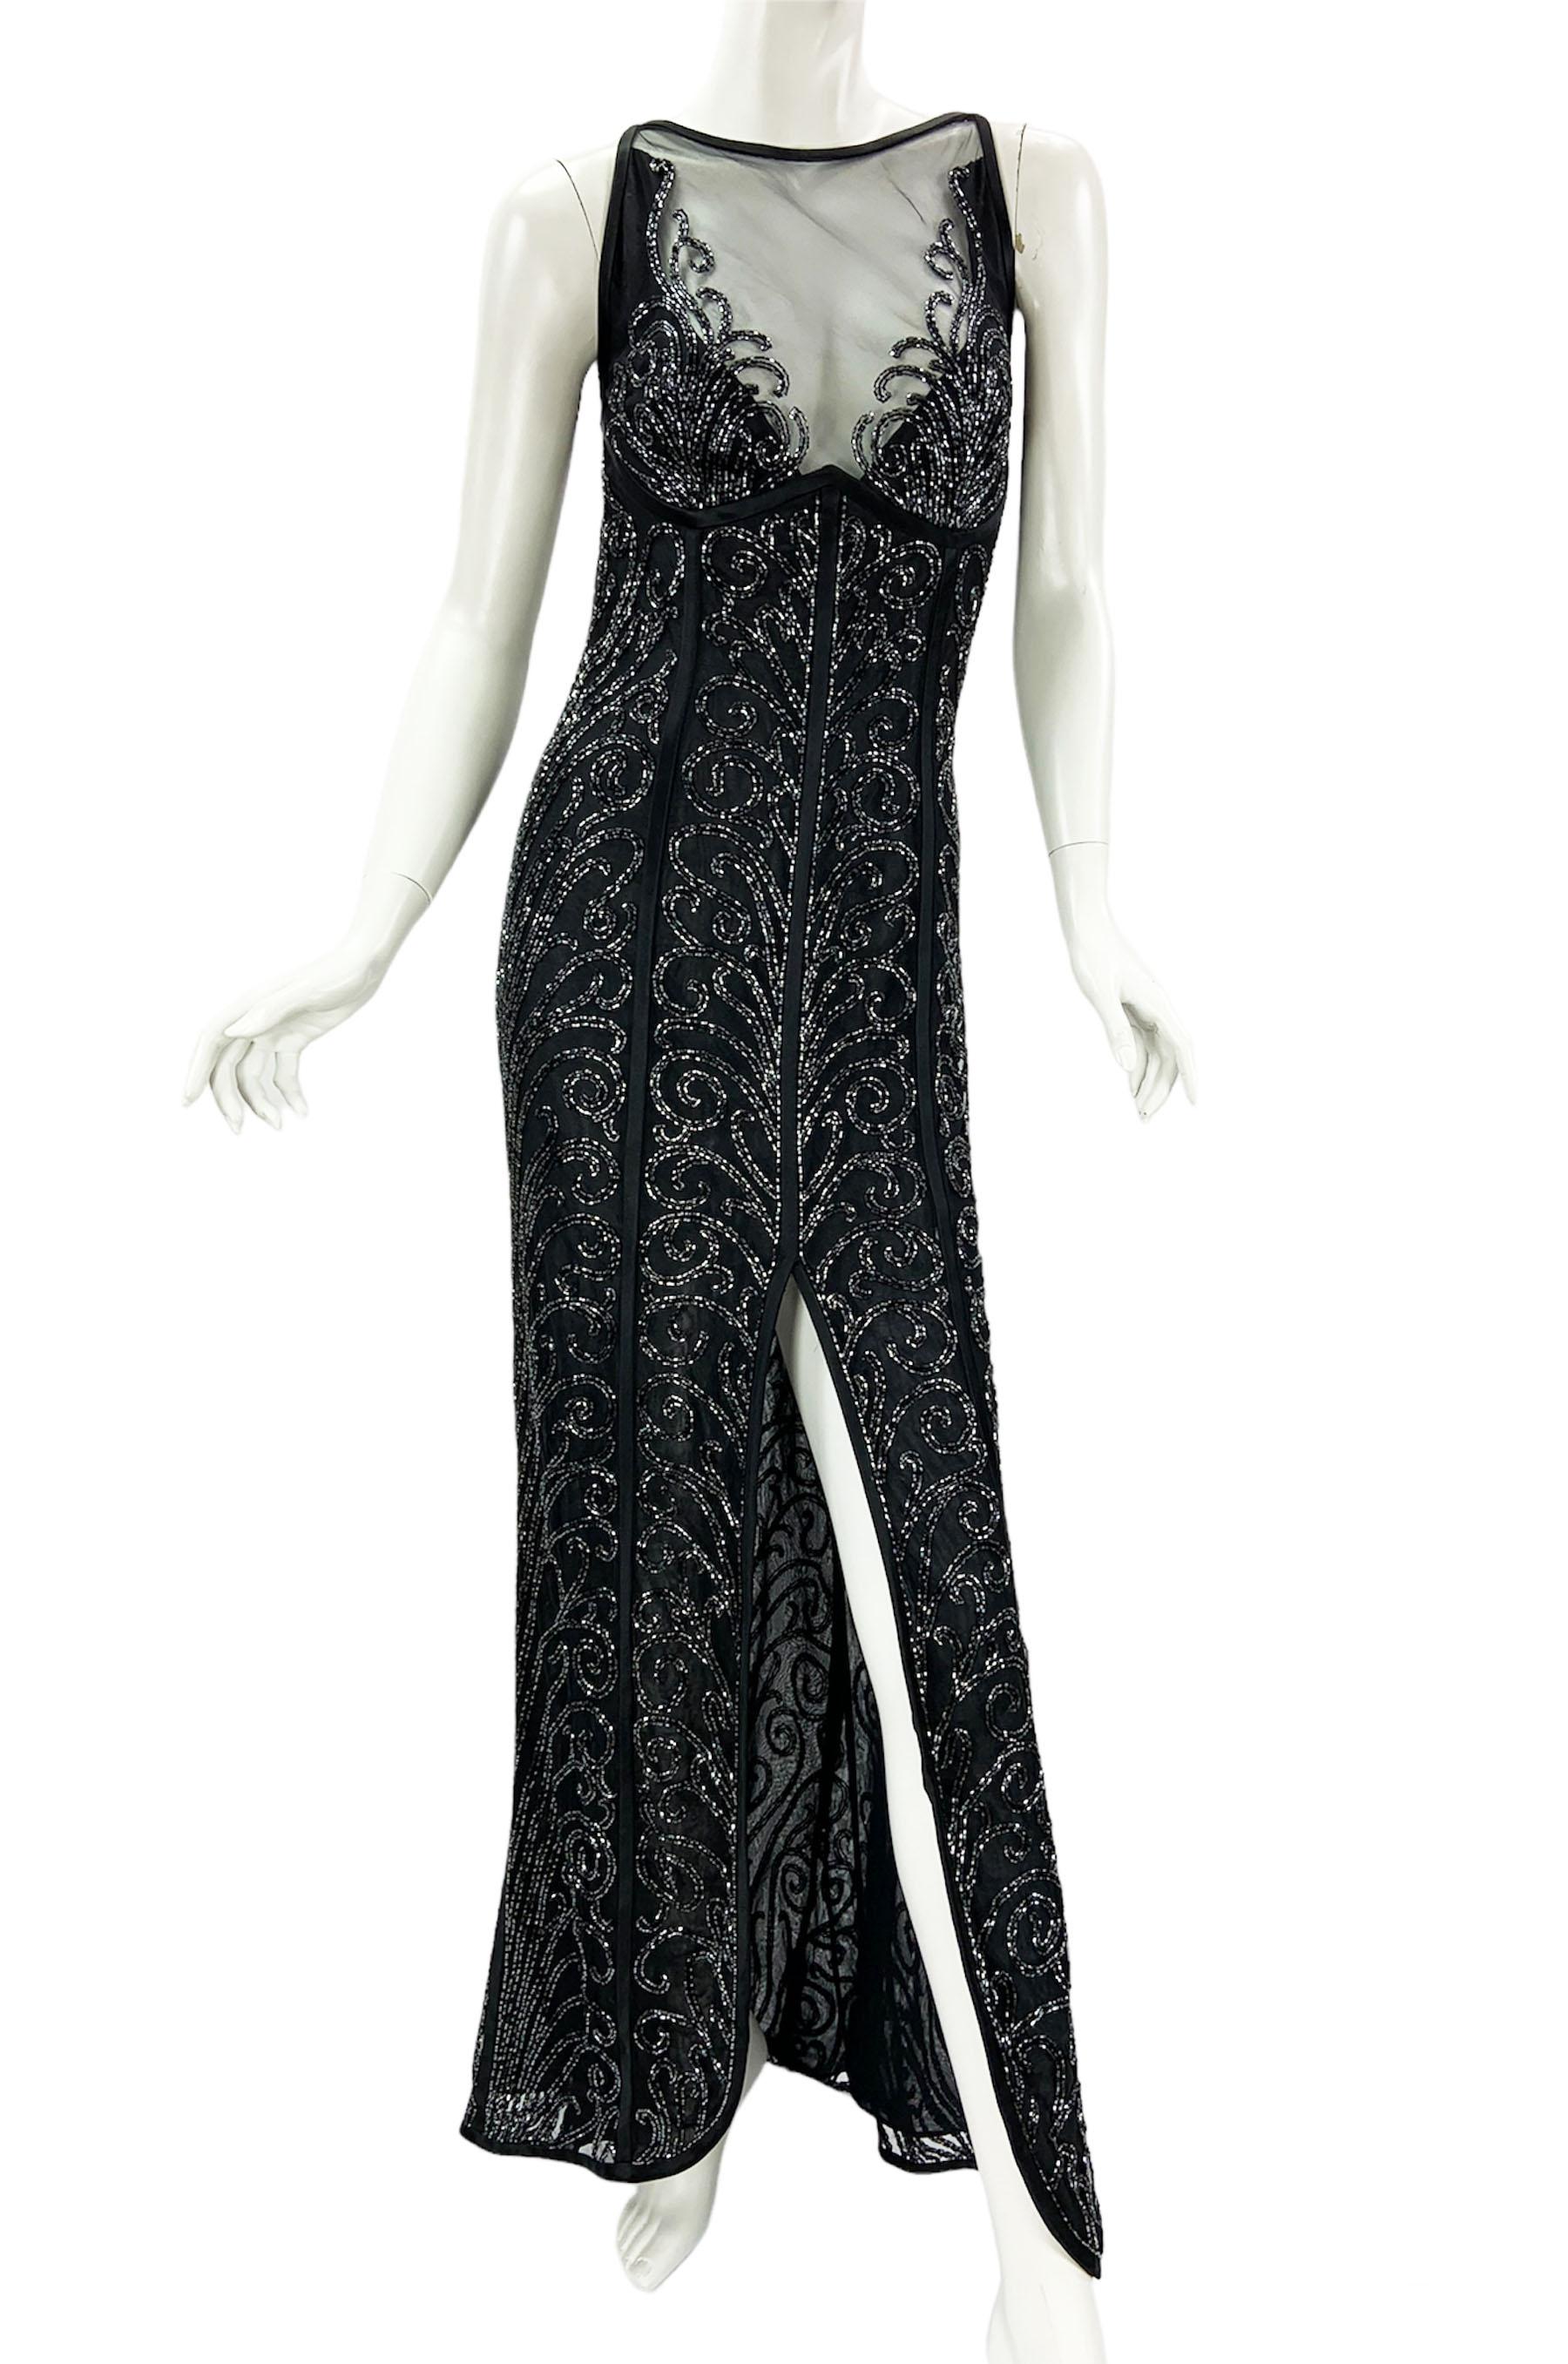 Vintage Bob Mackie Black Fully Beaded Tulle Dress Gown
US size - 12
Classy Black, Swirl Beads Design over the Tulle, Semi-Sheer,  
Fully Lined, Open Back, High Front Slit, Black Satin Trim, Zip Closure.
Measurements: Length - 59 inches front ( 62